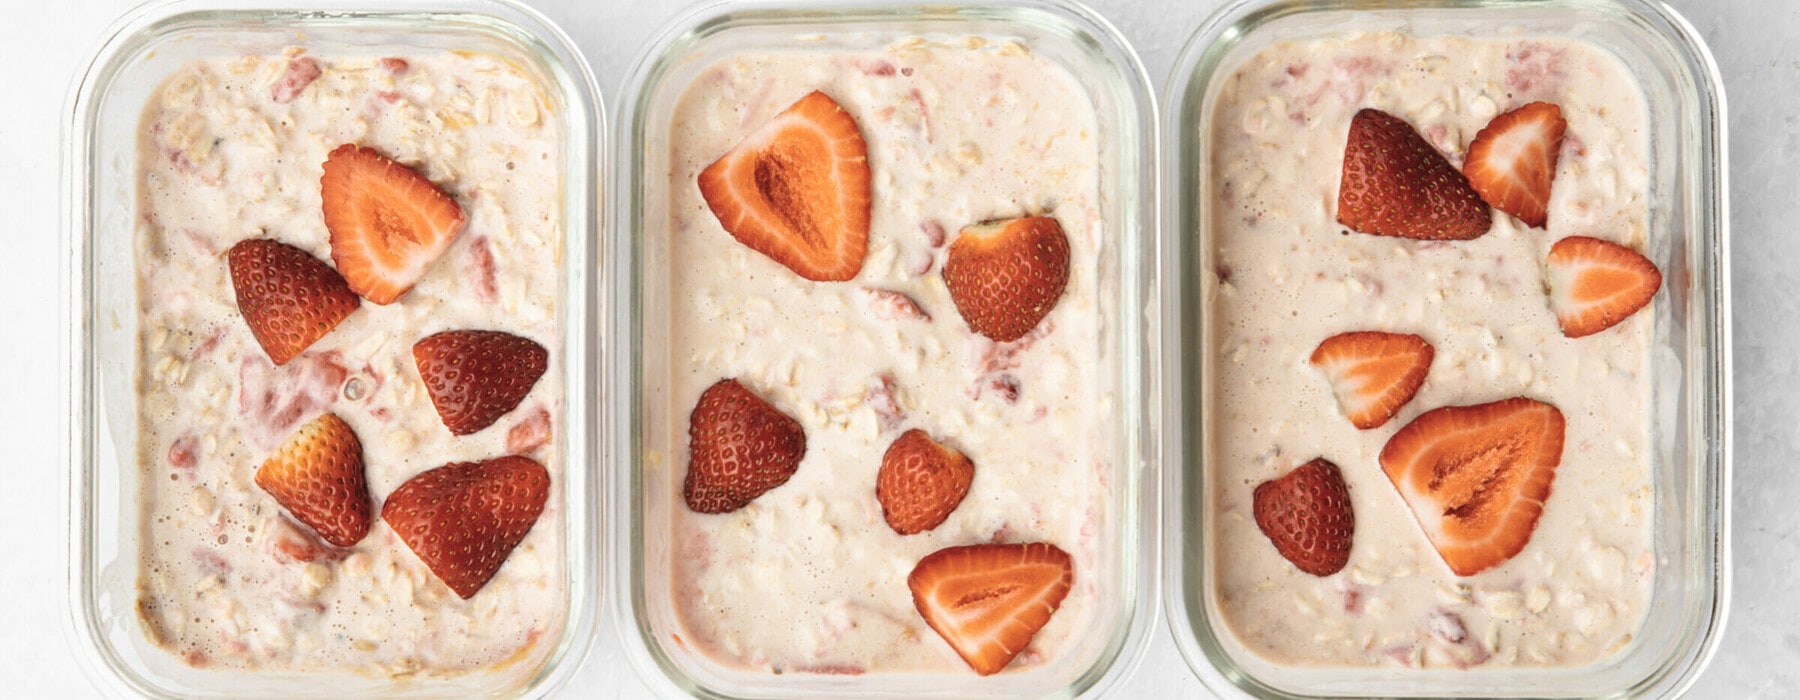 3 containers with pink coloured oats and sliced strawberries on each.